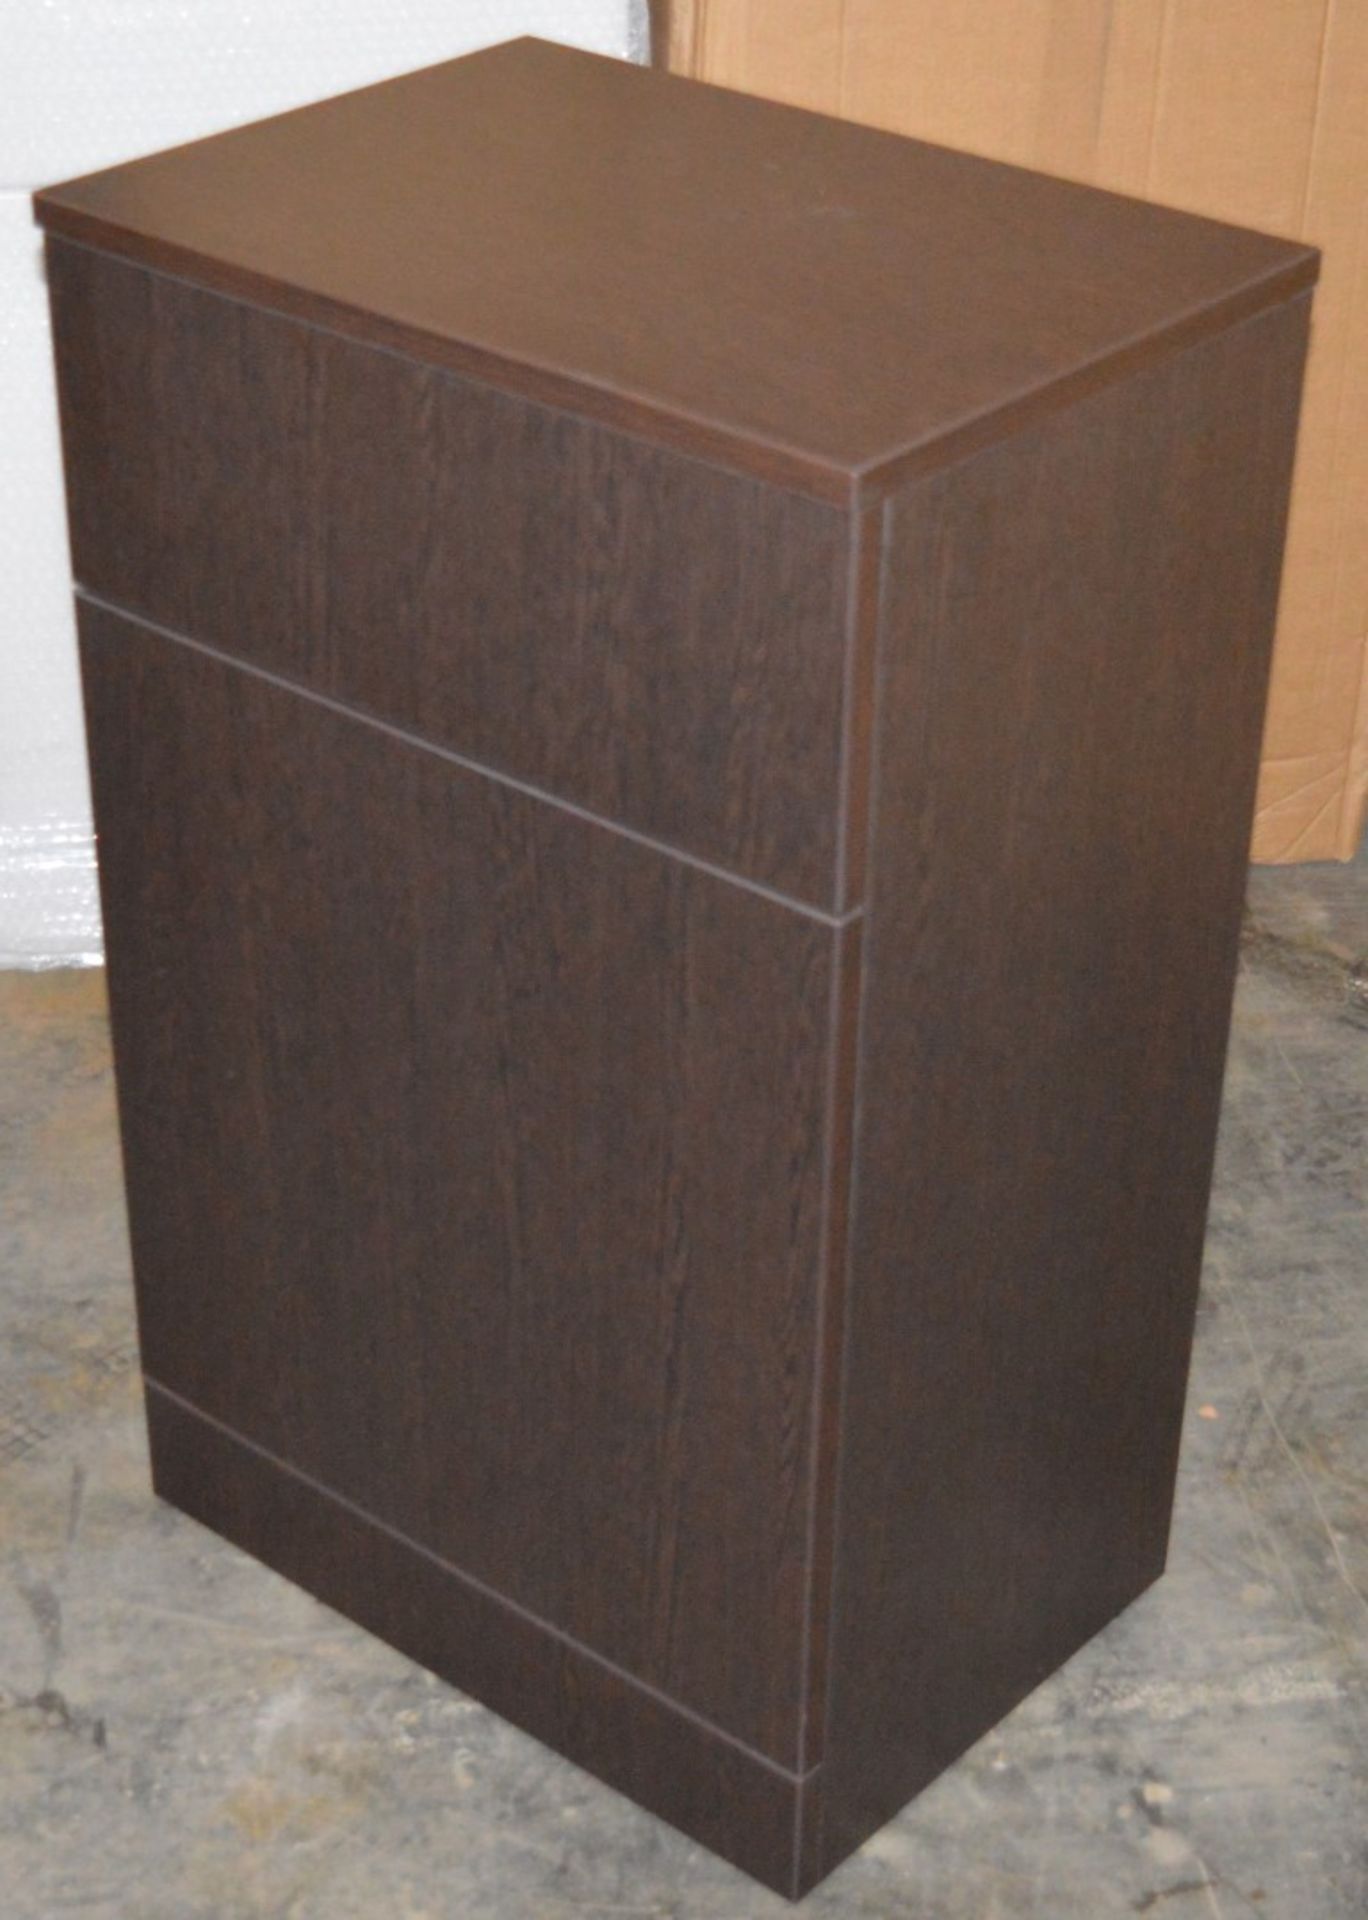 10 x Venizia BTW Toilet Pan Units in Wenge With Concealed Cisterns - 500mm Width - Includes Push